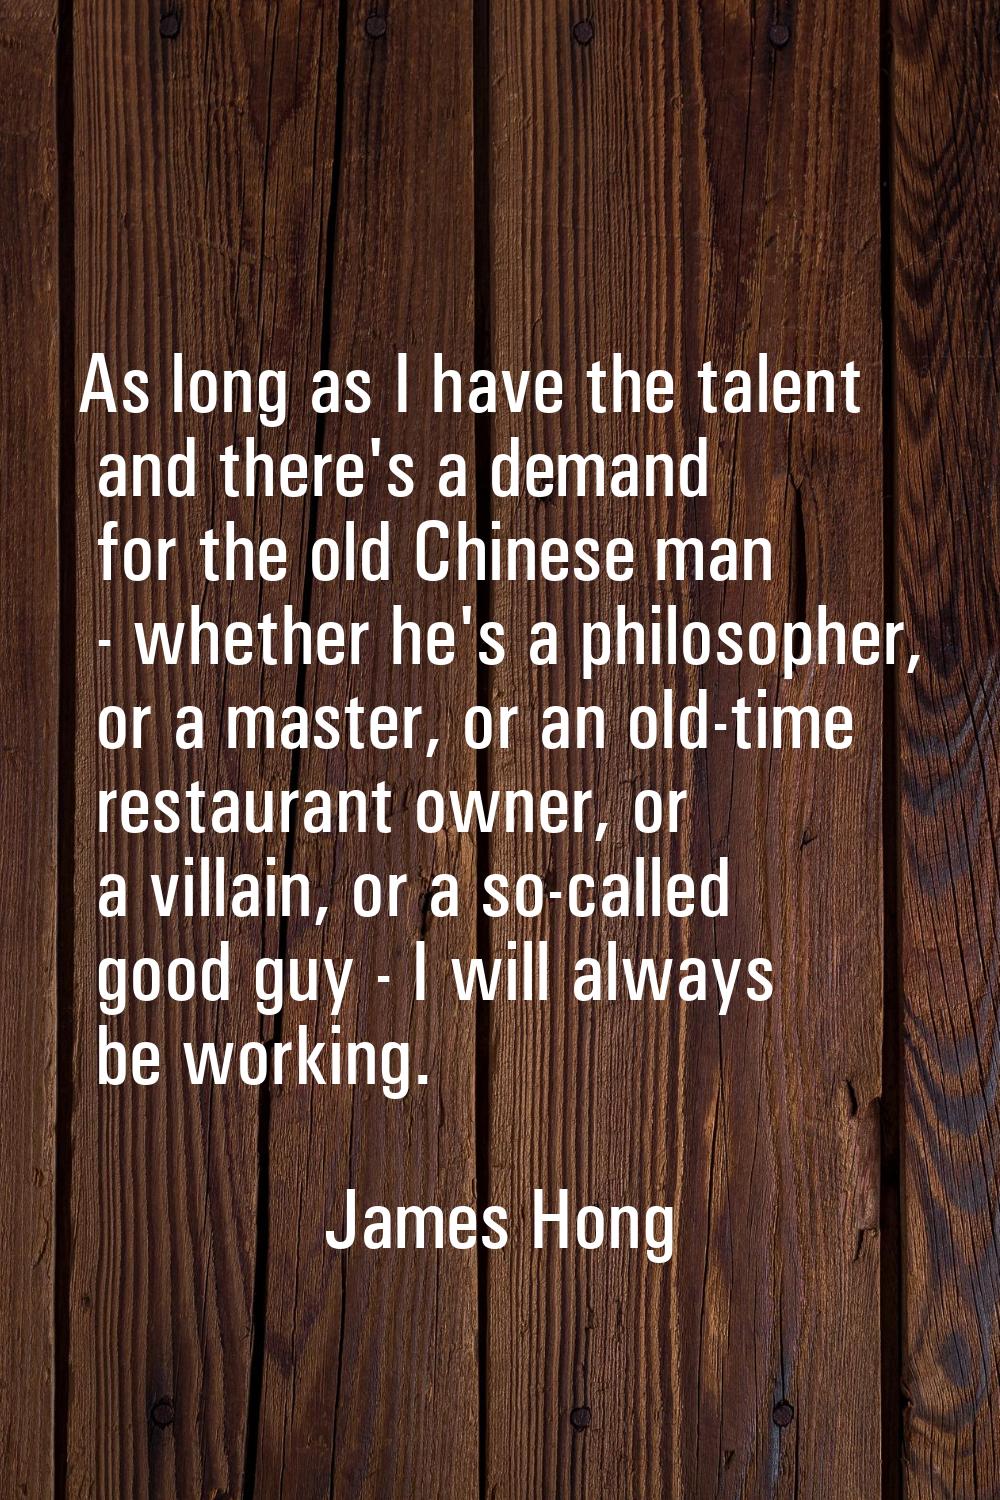 As long as I have the talent and there's a demand for the old Chinese man - whether he's a philosop